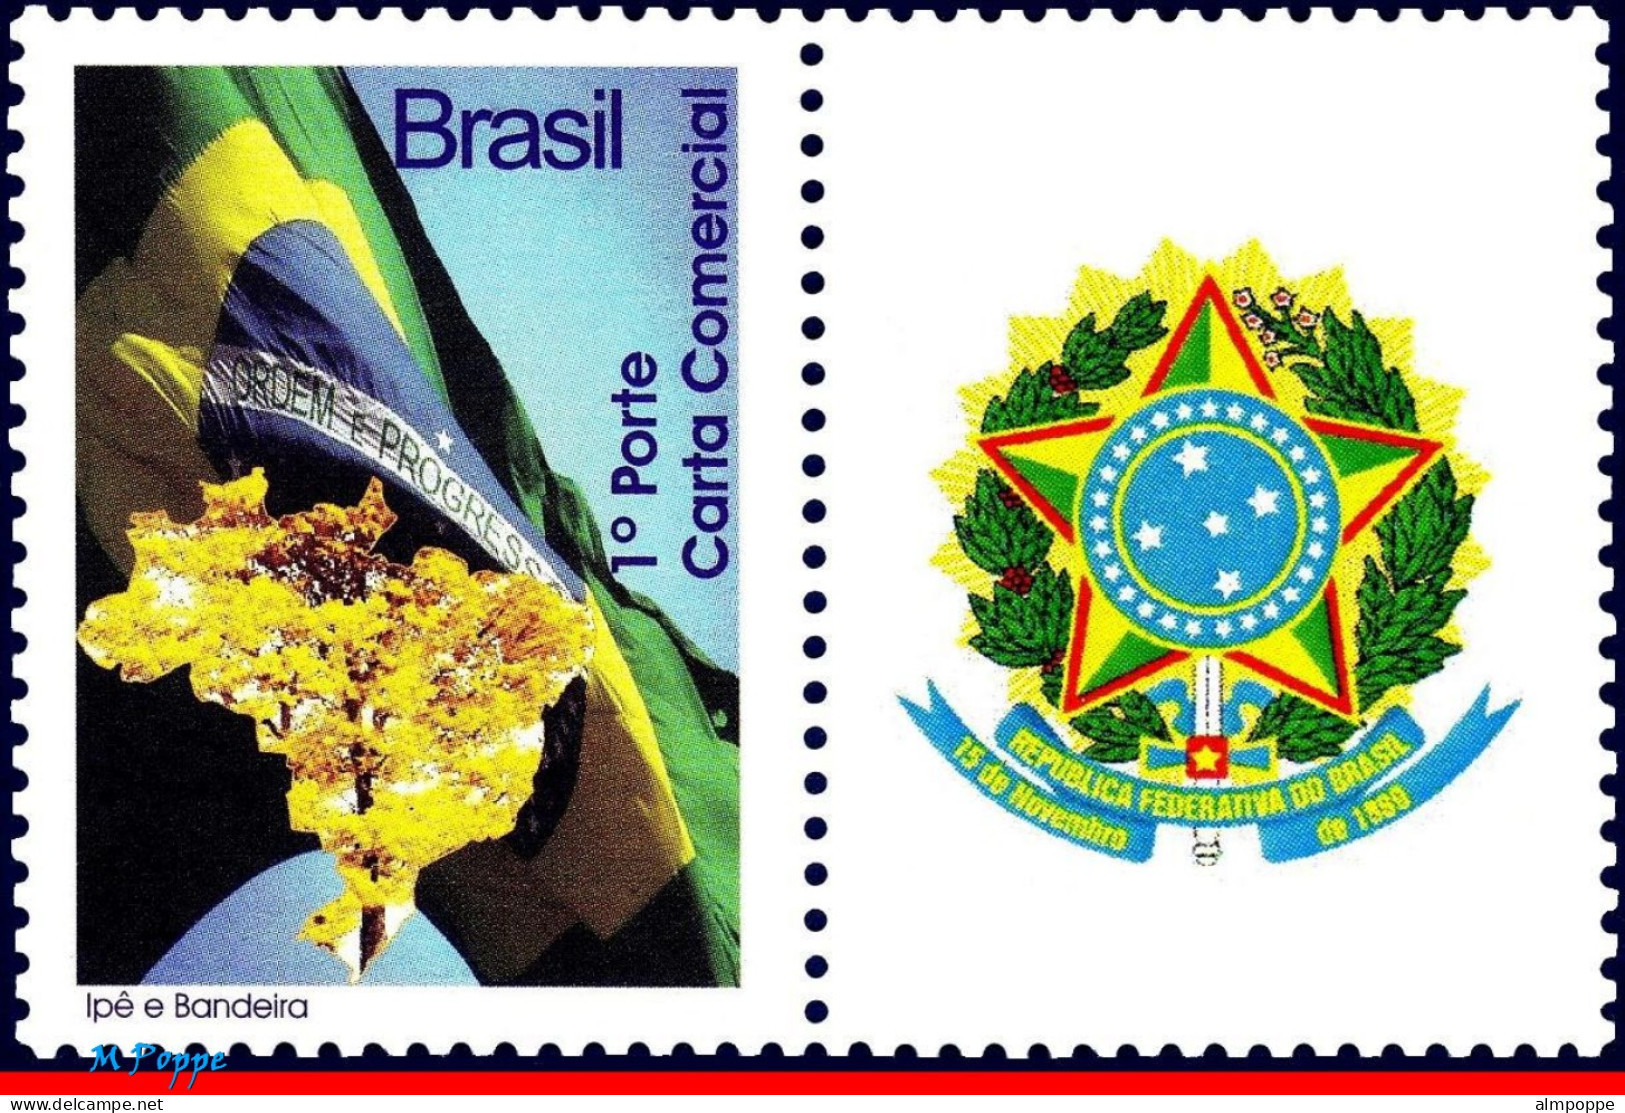 Ref. BR-3080N-1 BRAZIL 2009 - IPE WOOD VE, MAPS, FLAGS,COAT OF ARMS, PERSONALIZED MNH, COATS OF ARMS 1V Sc# 3080N - Sellos